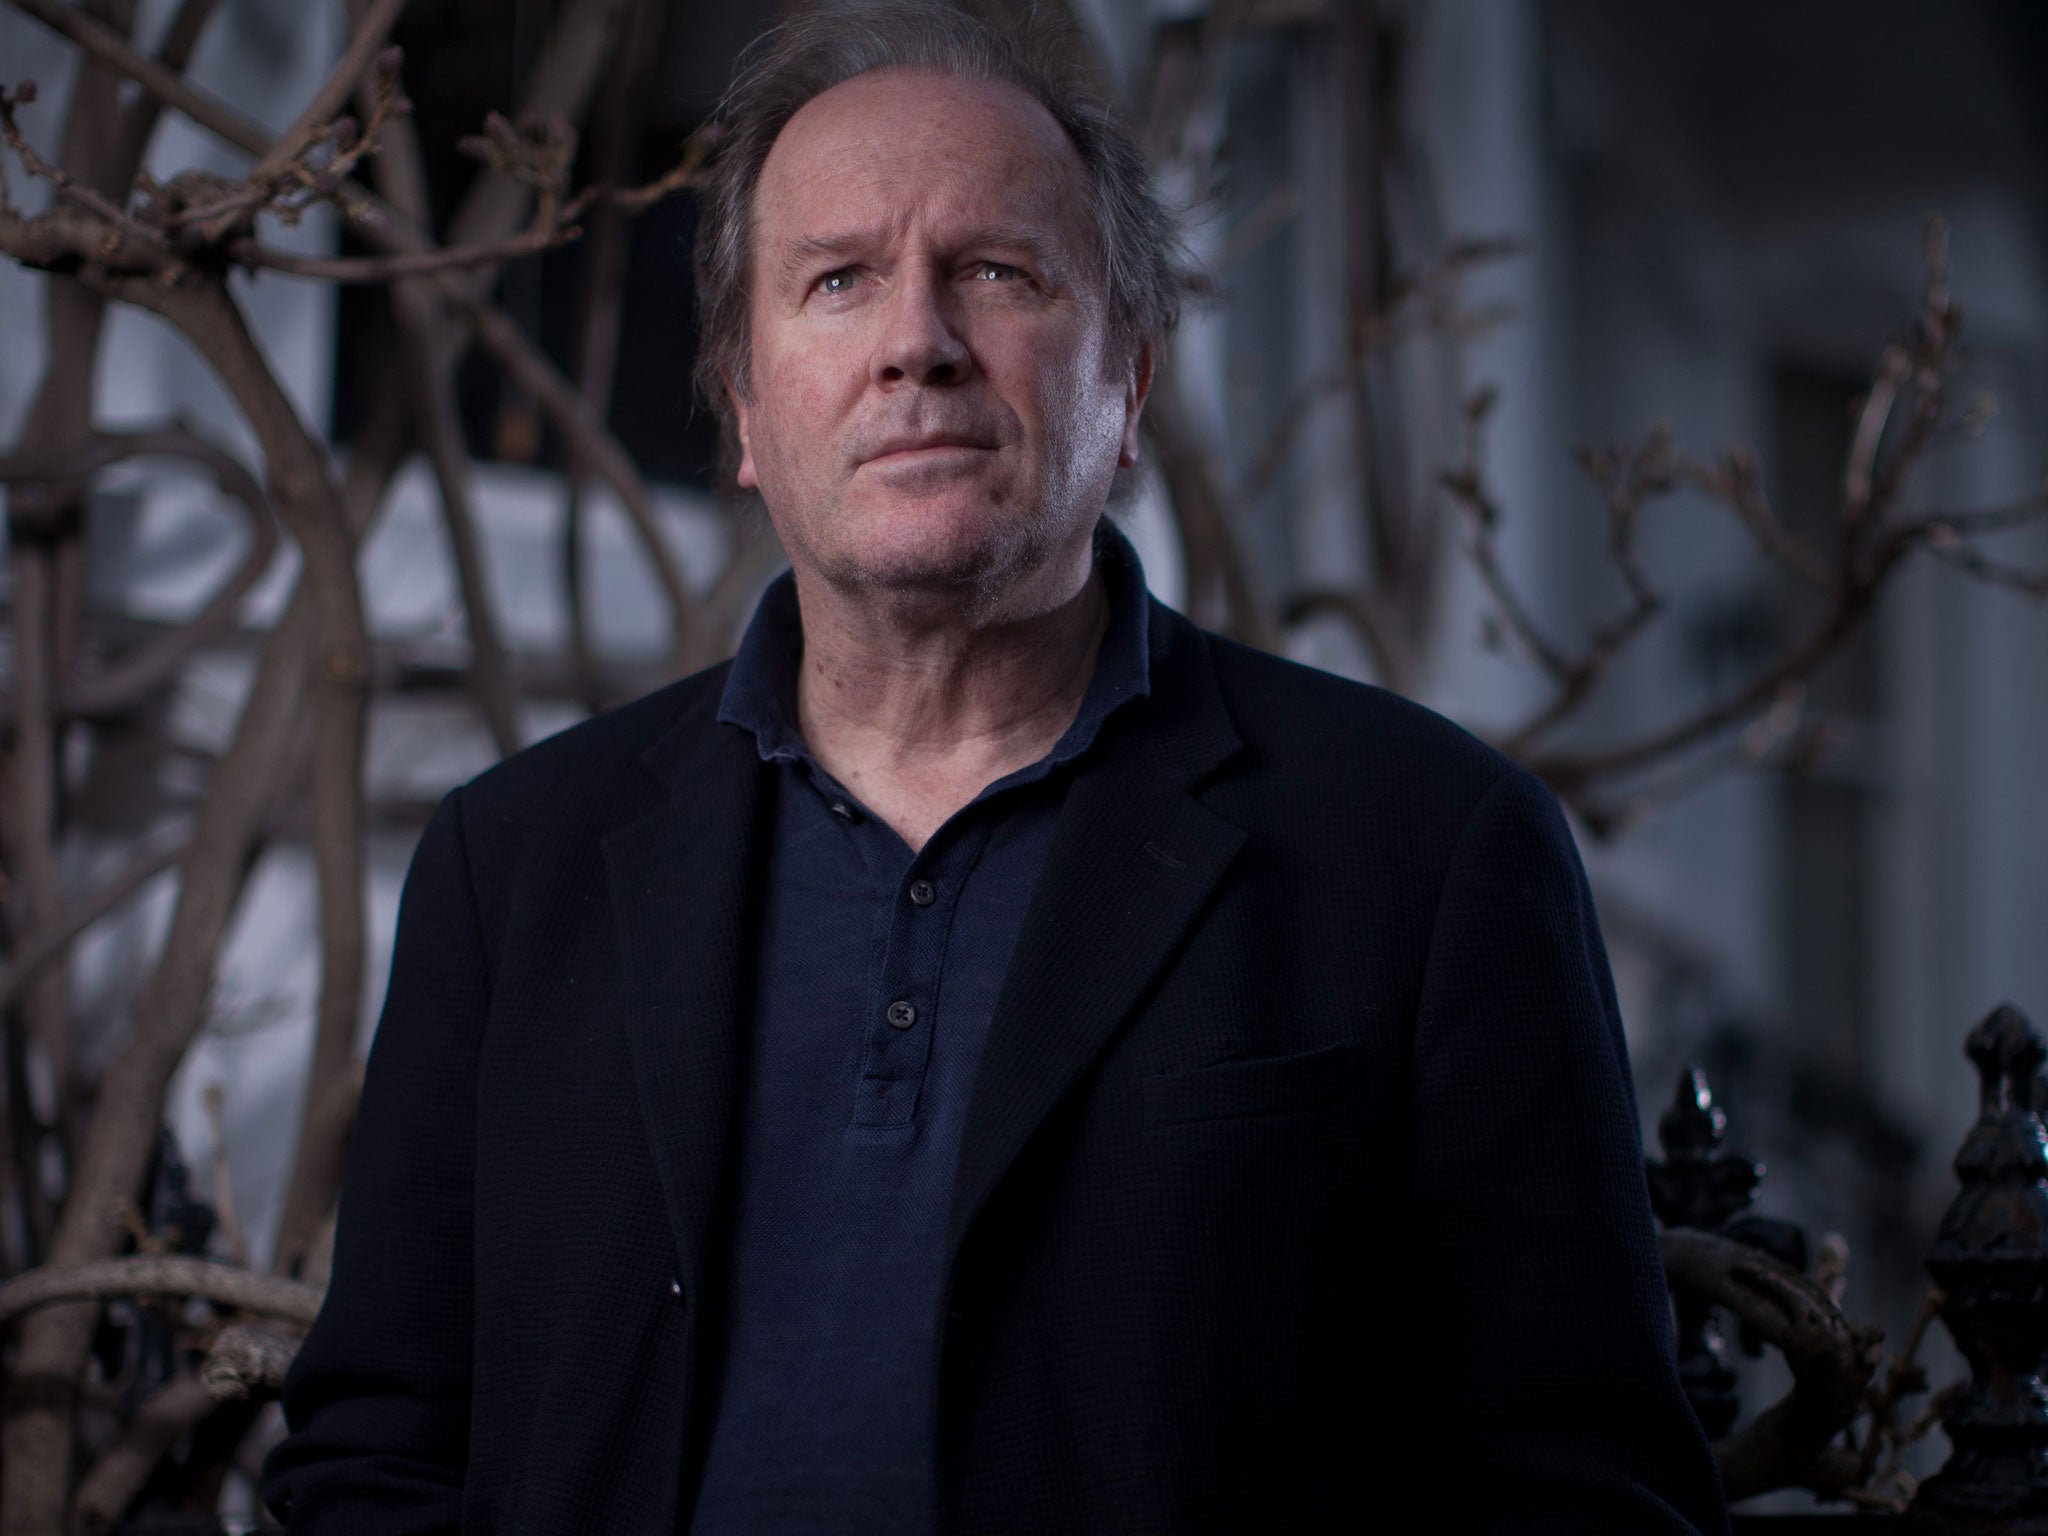 William Boyd was amongst 20 leading writers wgi wrote an open letter to The Telegraph arguing they were “gravely concerned about the impact of this judgment on the freedom to read and write in Britain”.